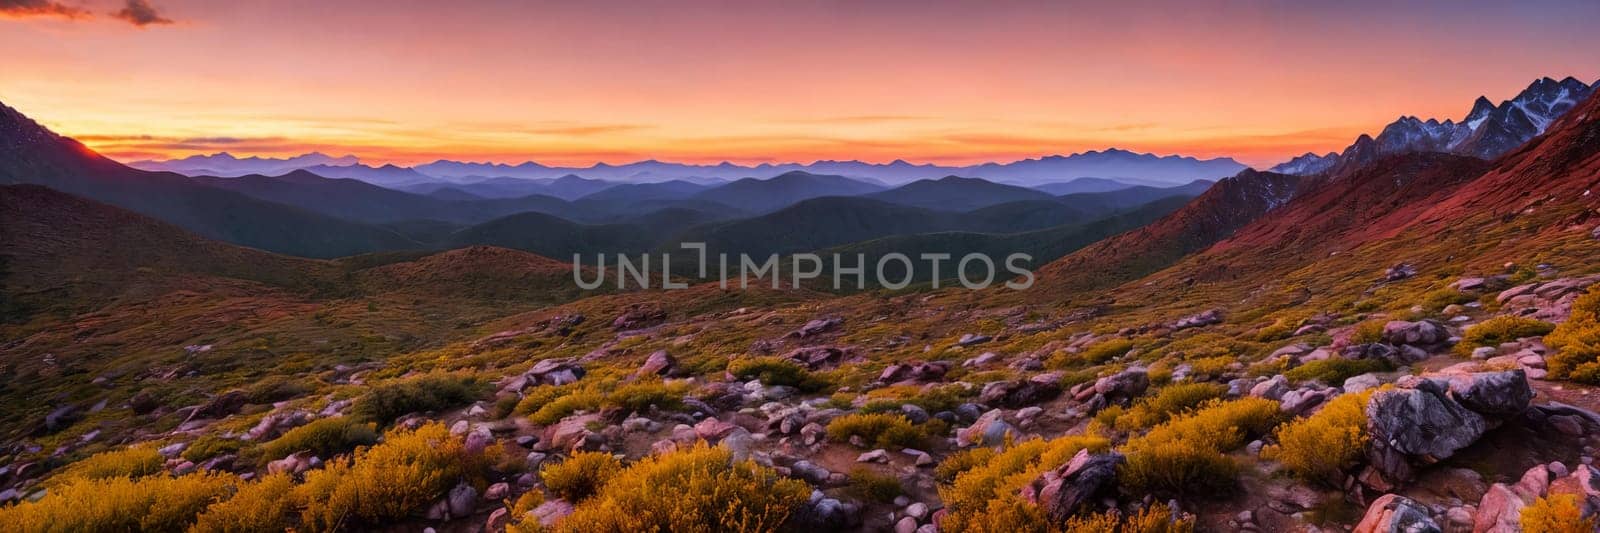 Rugged beauty of a mountain range at golden hour, with the sun setting in the background painting the sky in hues of orange and pink